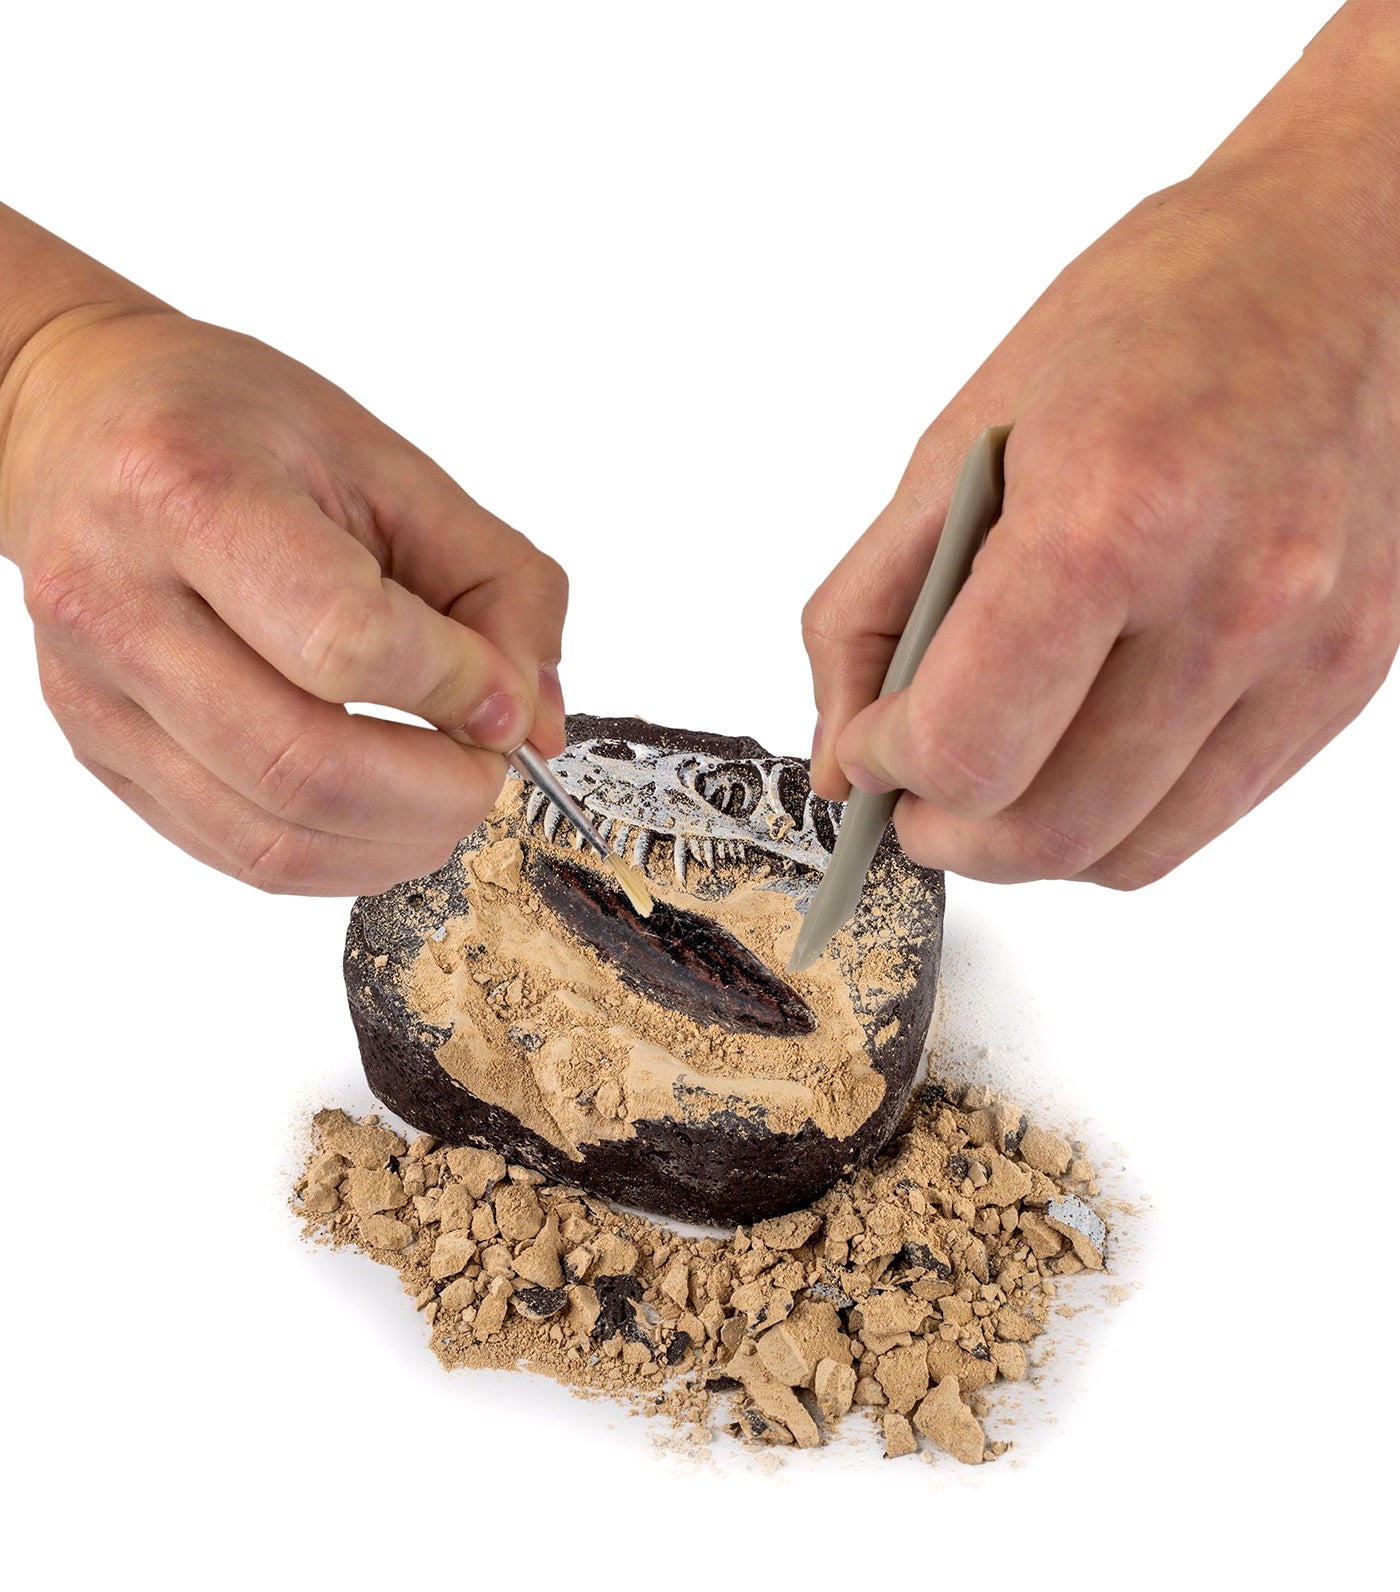 Dino Fossil Dig Kit